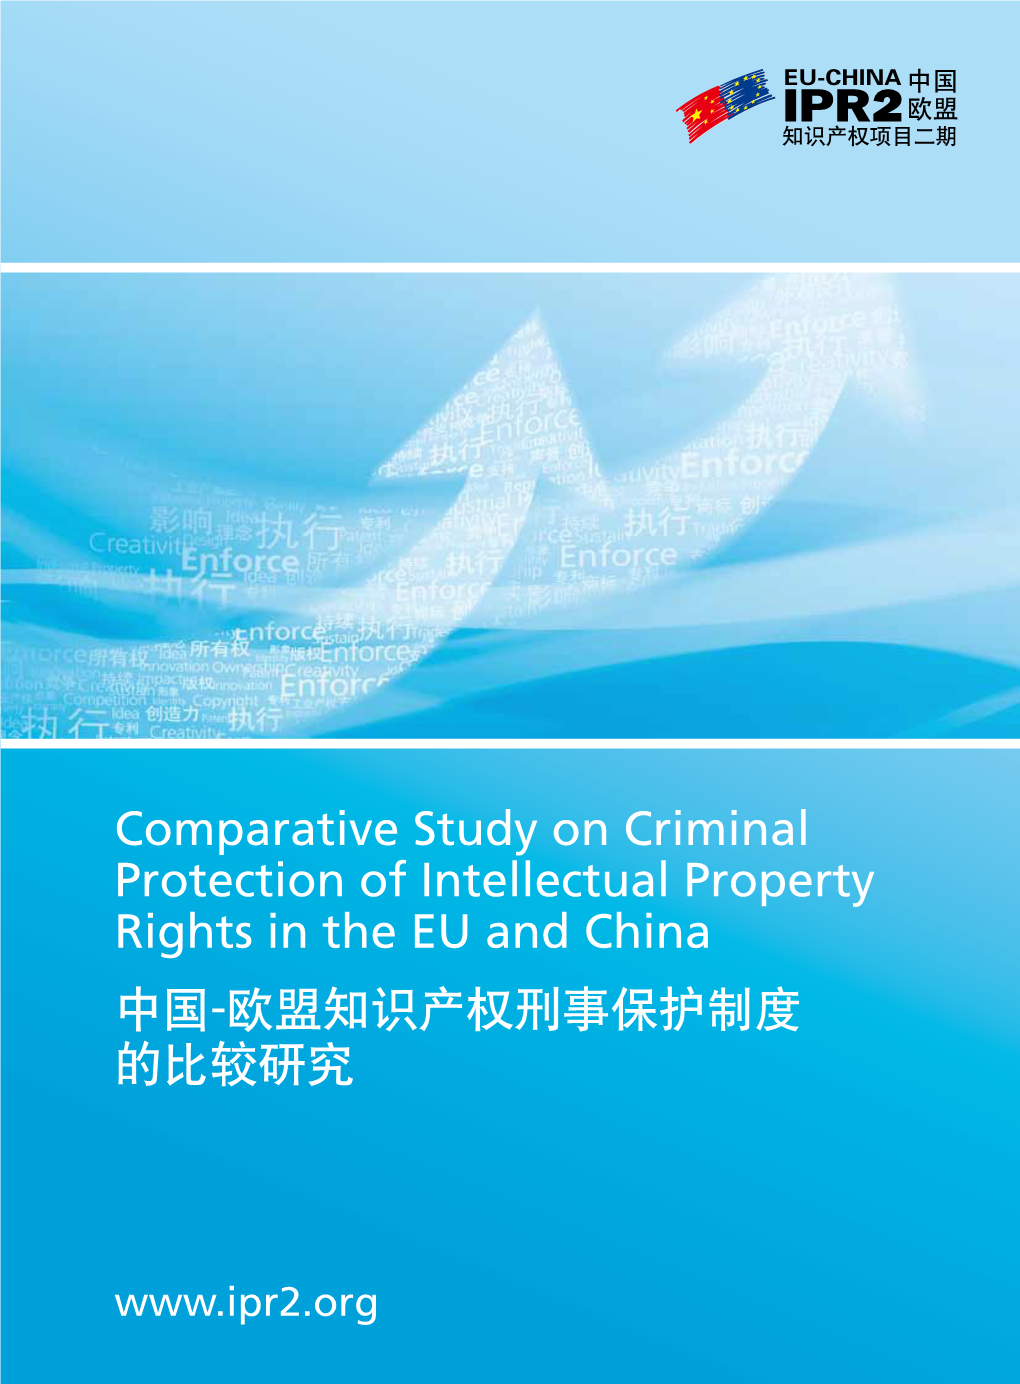 Comparative Study on Criminal Protection of Intellectual Property Rights in the EU and China 中国-欧盟知识产权刑事保护制度 的比较研究